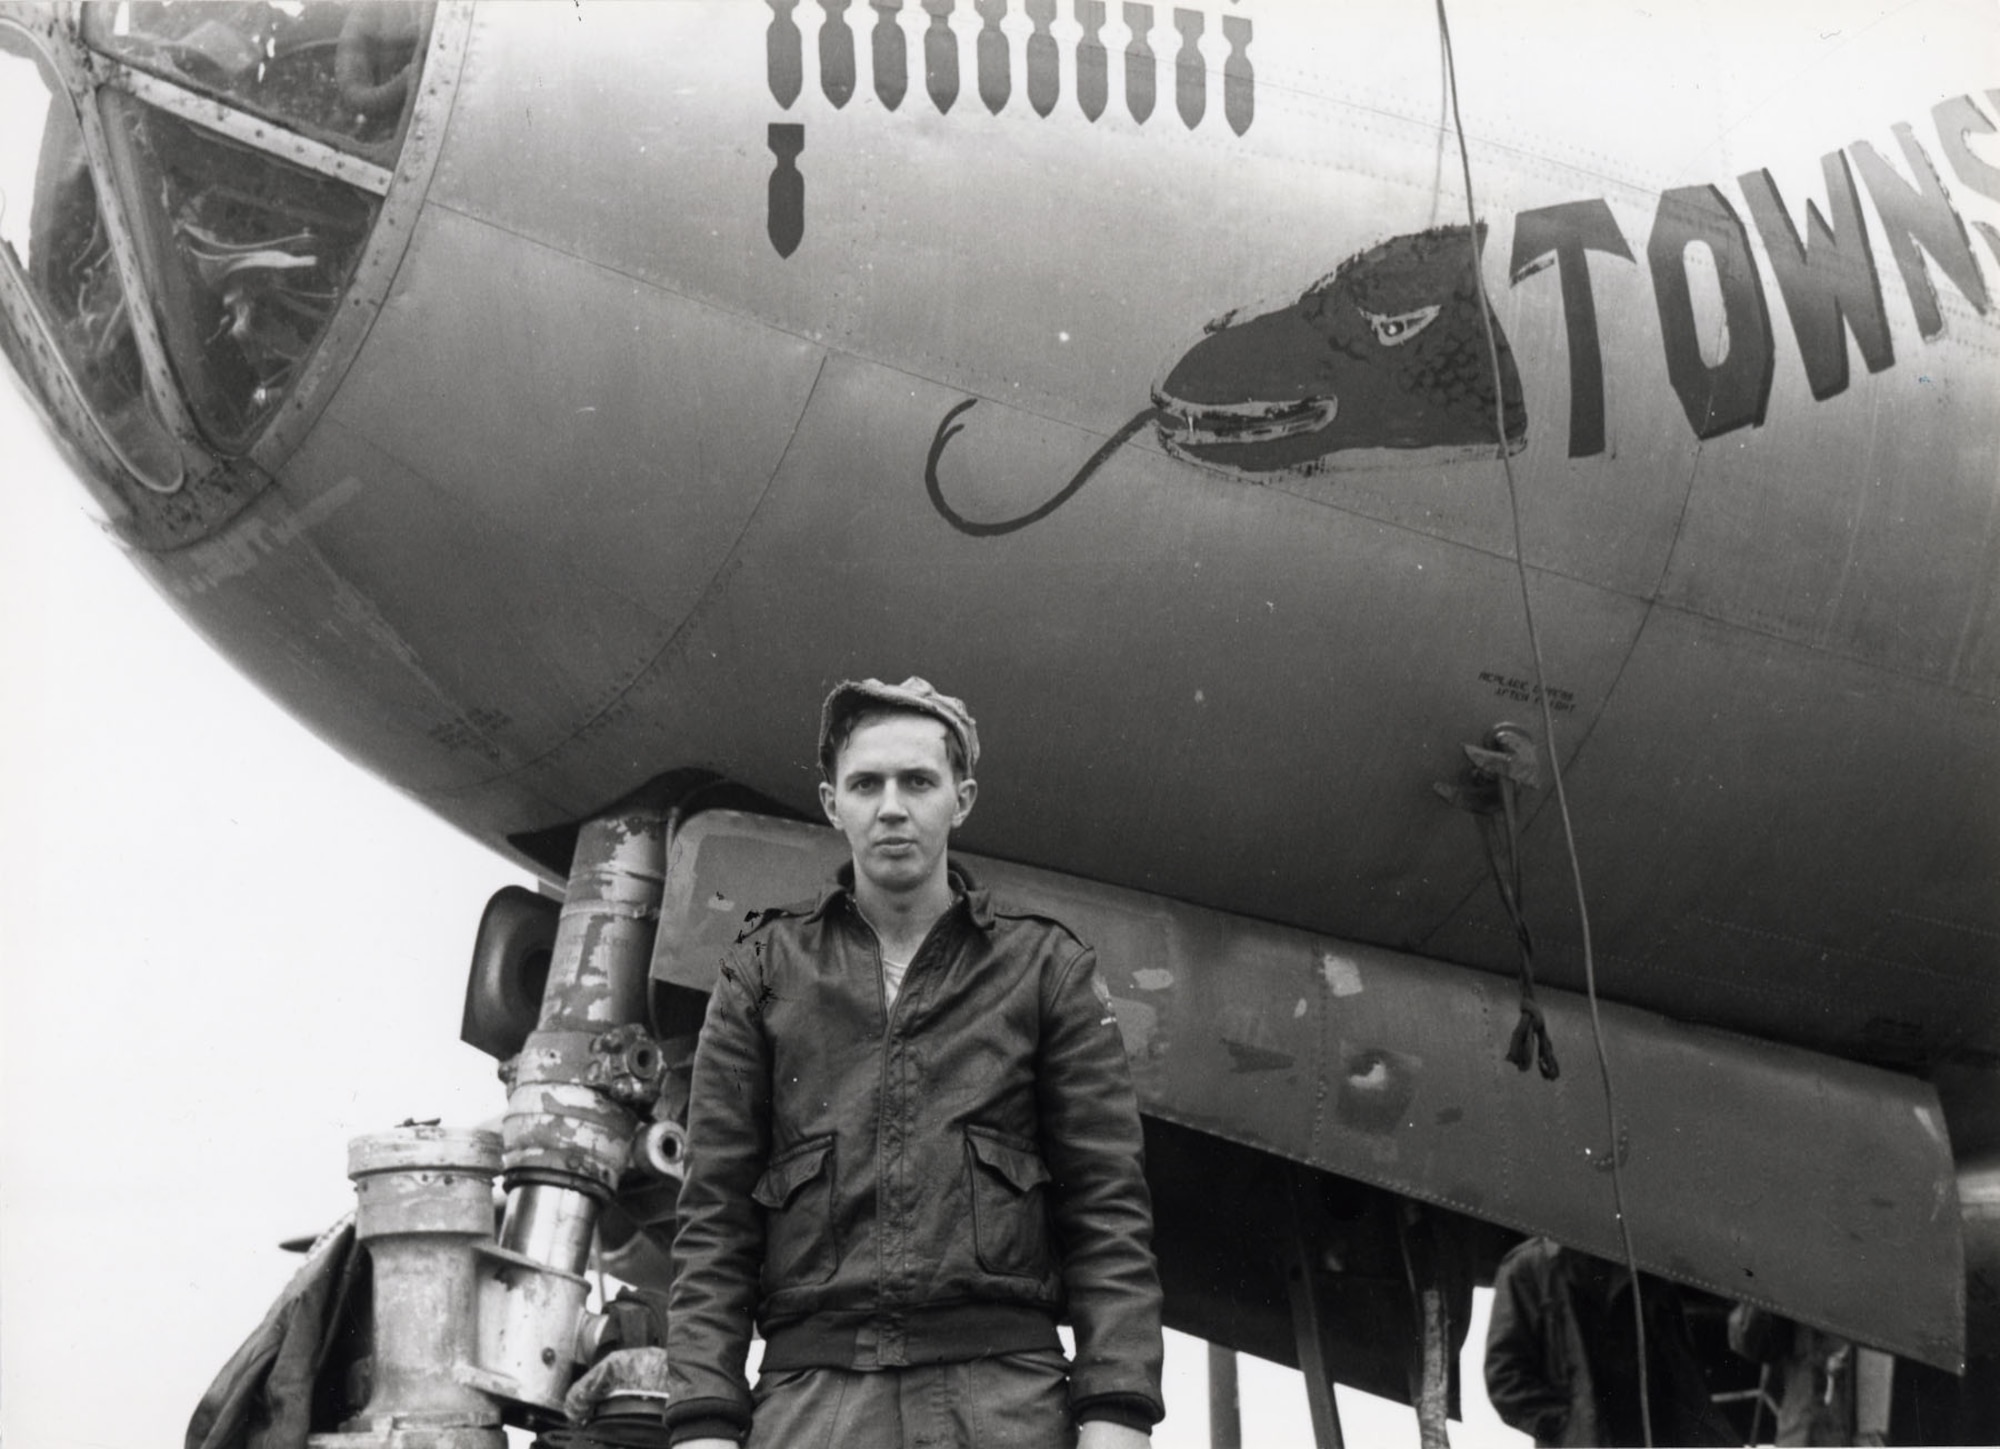 Sgt. Don Beck standing in front of "Townswick’s Terrors," wearing the jacket now on display at the National Museum of the U.S. Air Force. (U.S. Air Force photo)